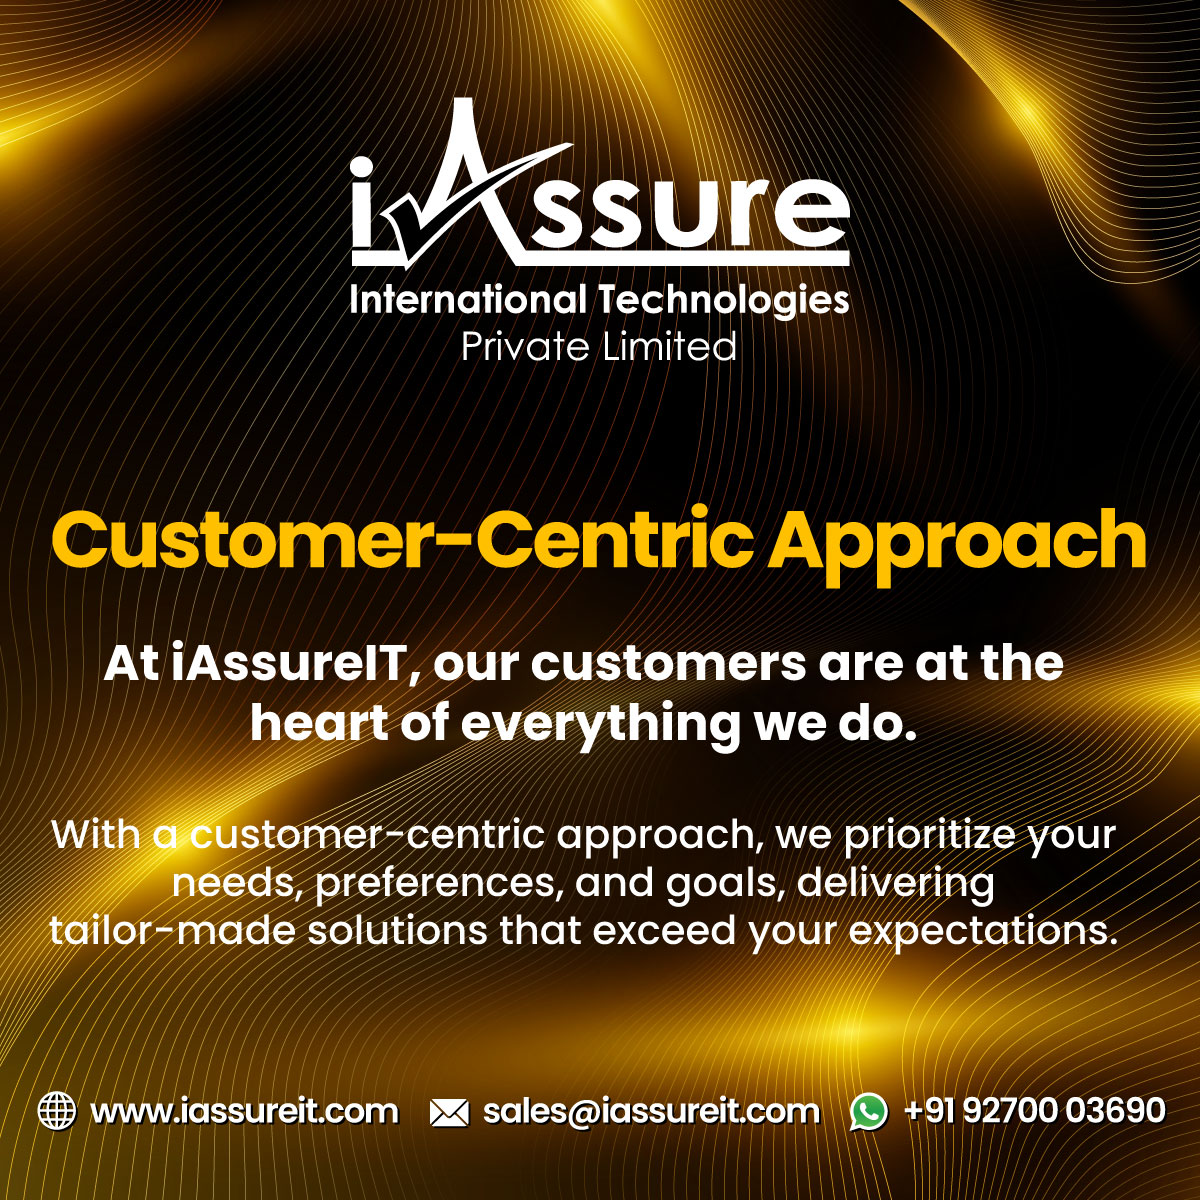 🌟 Customer-Centric Approach 🌟
At iAssureIT, our customers are at the heart of everything we do. 💖

📍 iassureit.com

 #iAssureIT #CustomerCentric #ExceedingExpectations 🌟